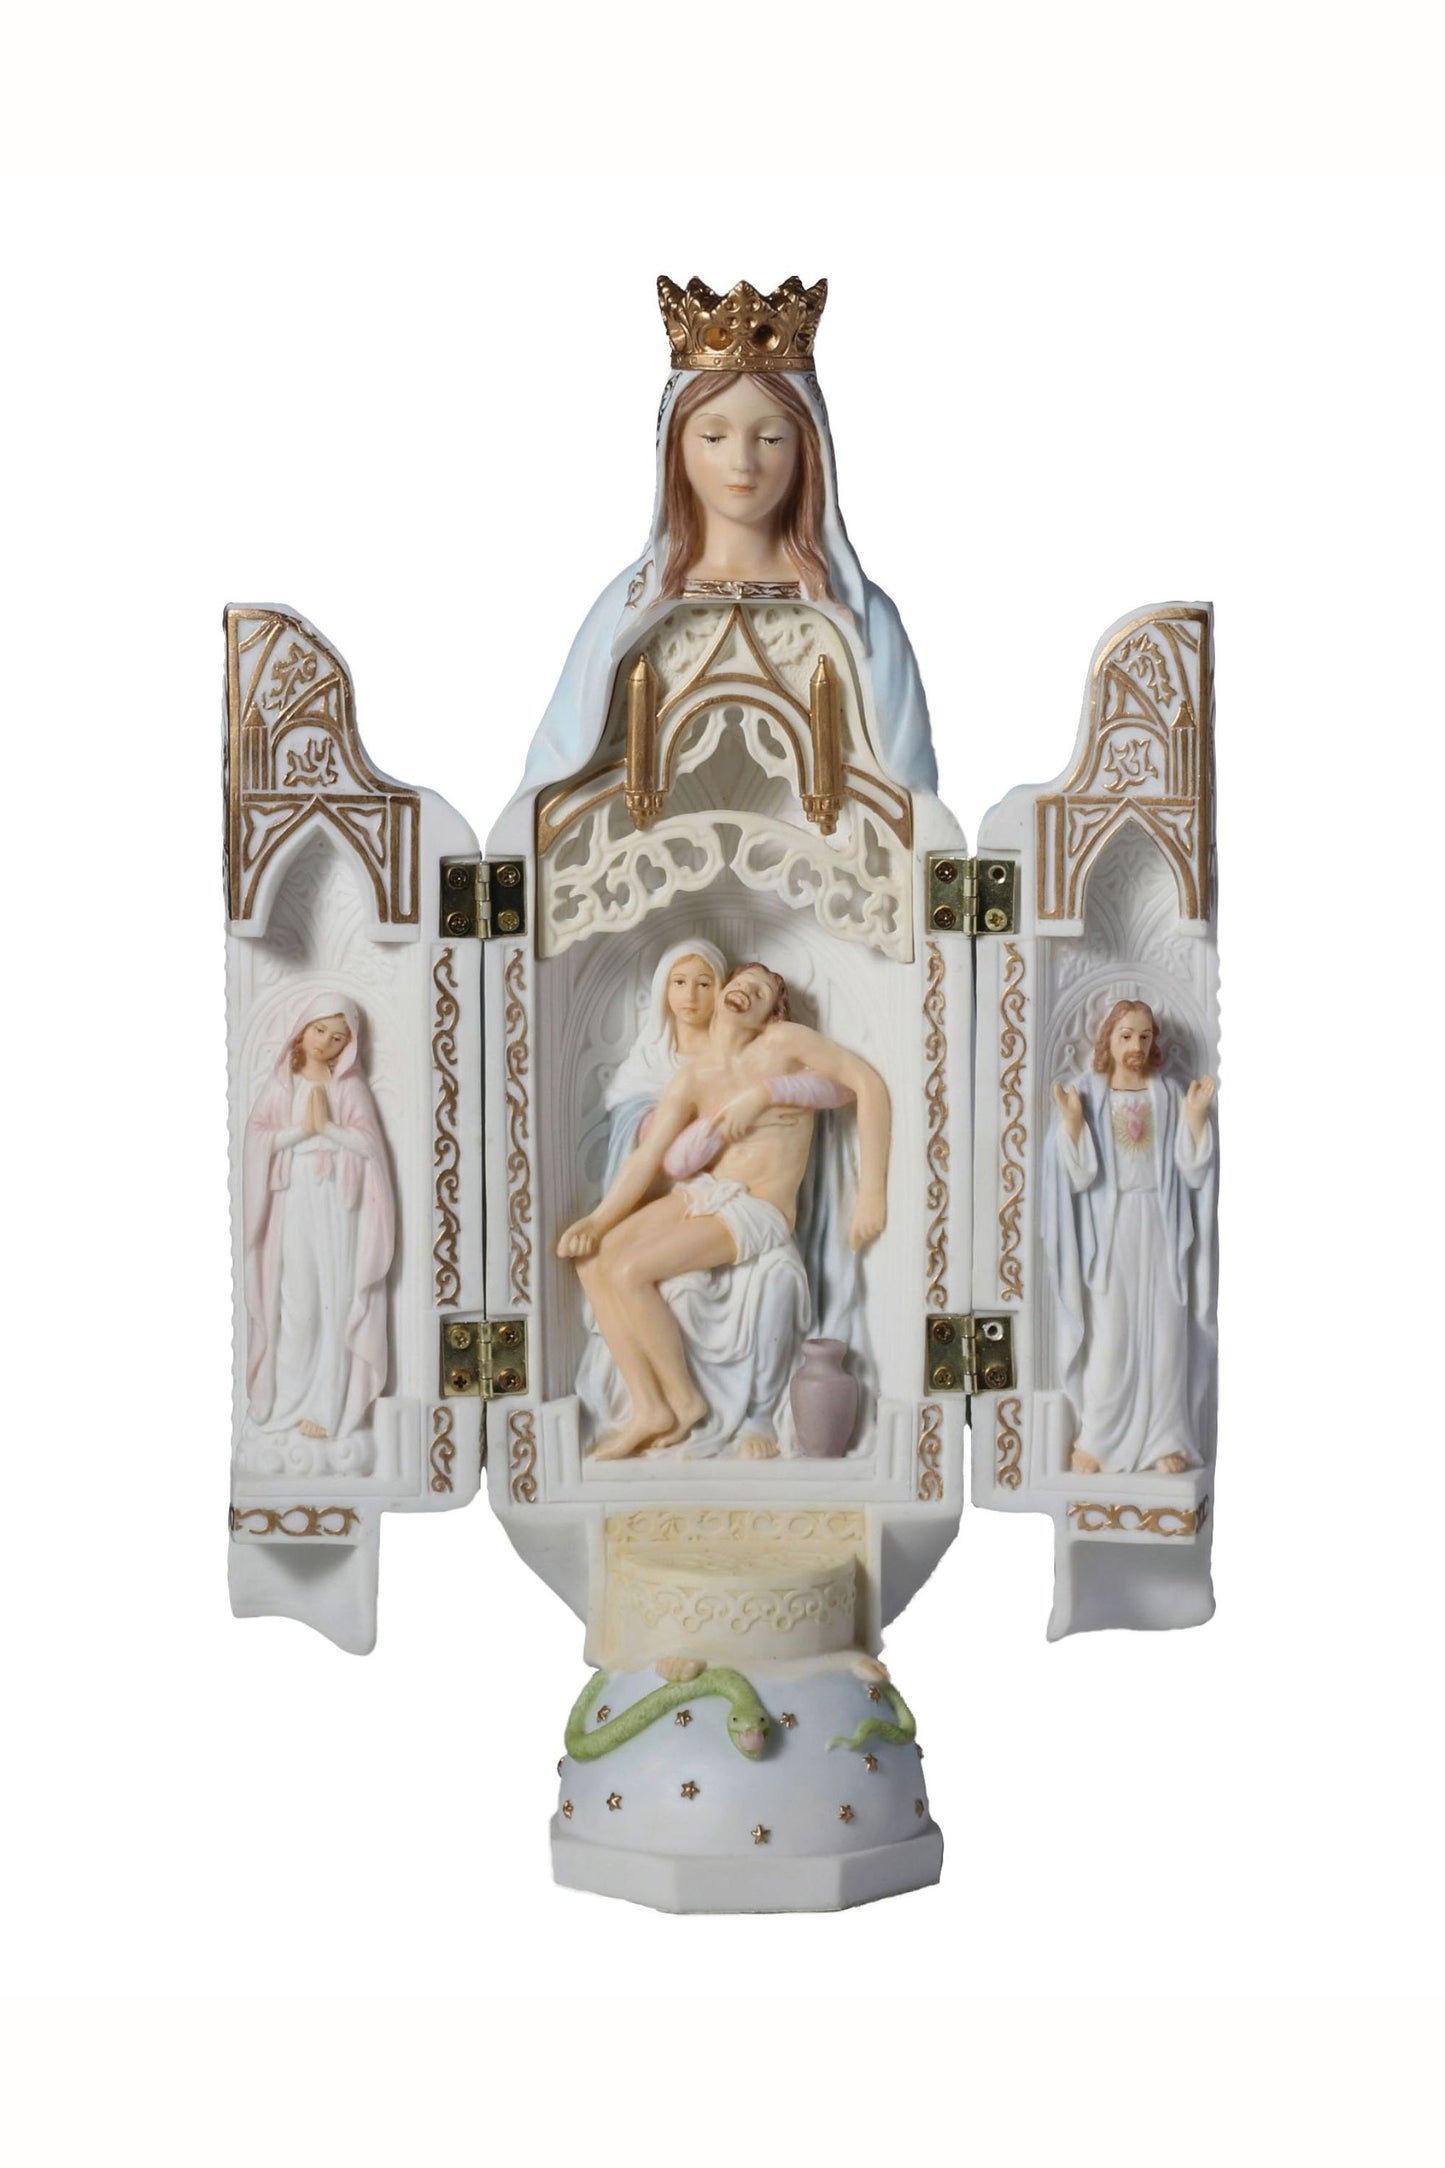 SR-75630-WG Our Lady of Sorrows Triptych in Pastels, 11"